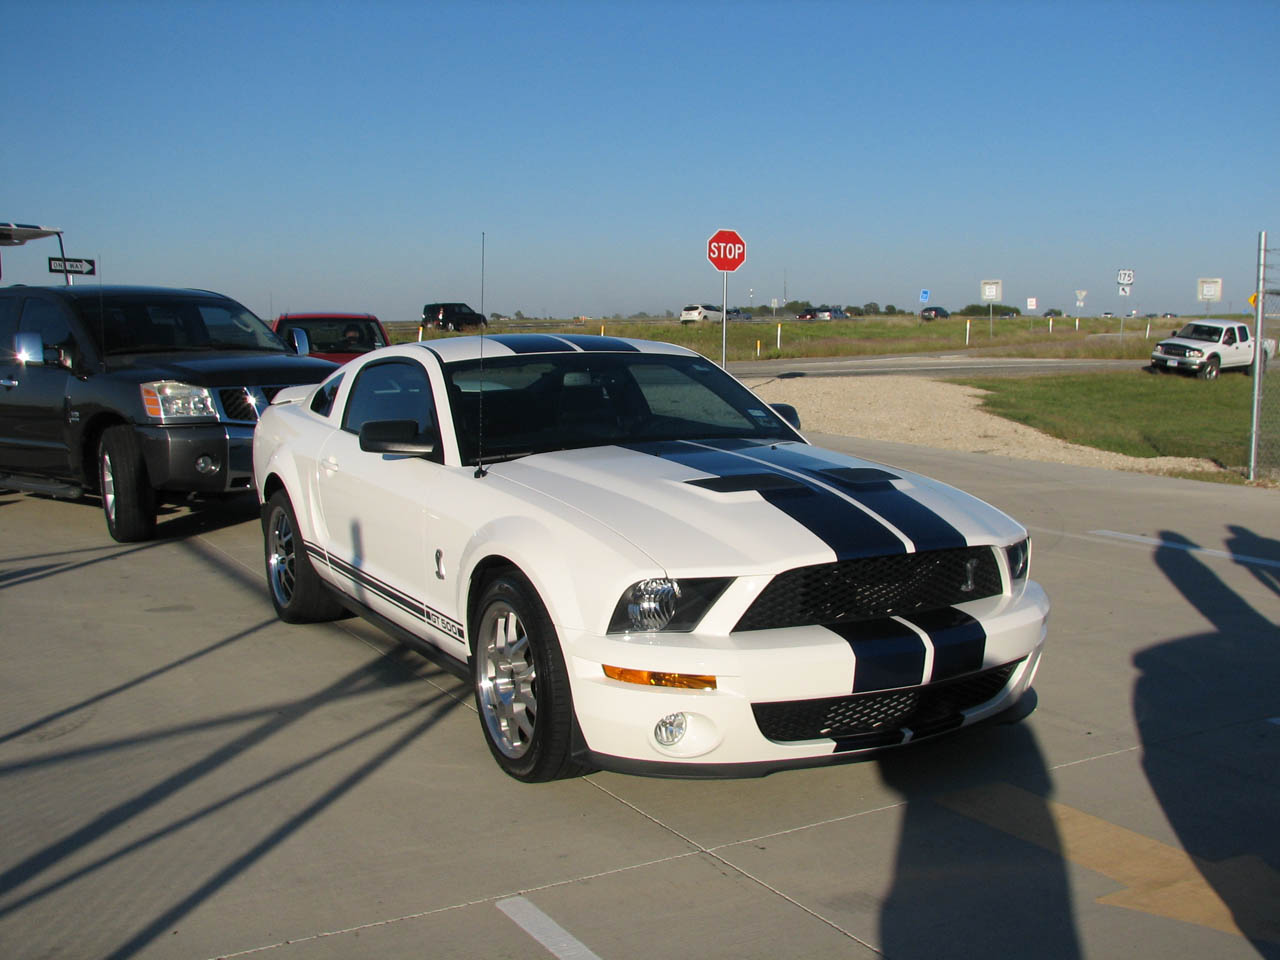  2007 Ford Mustang Shelby-GT500 